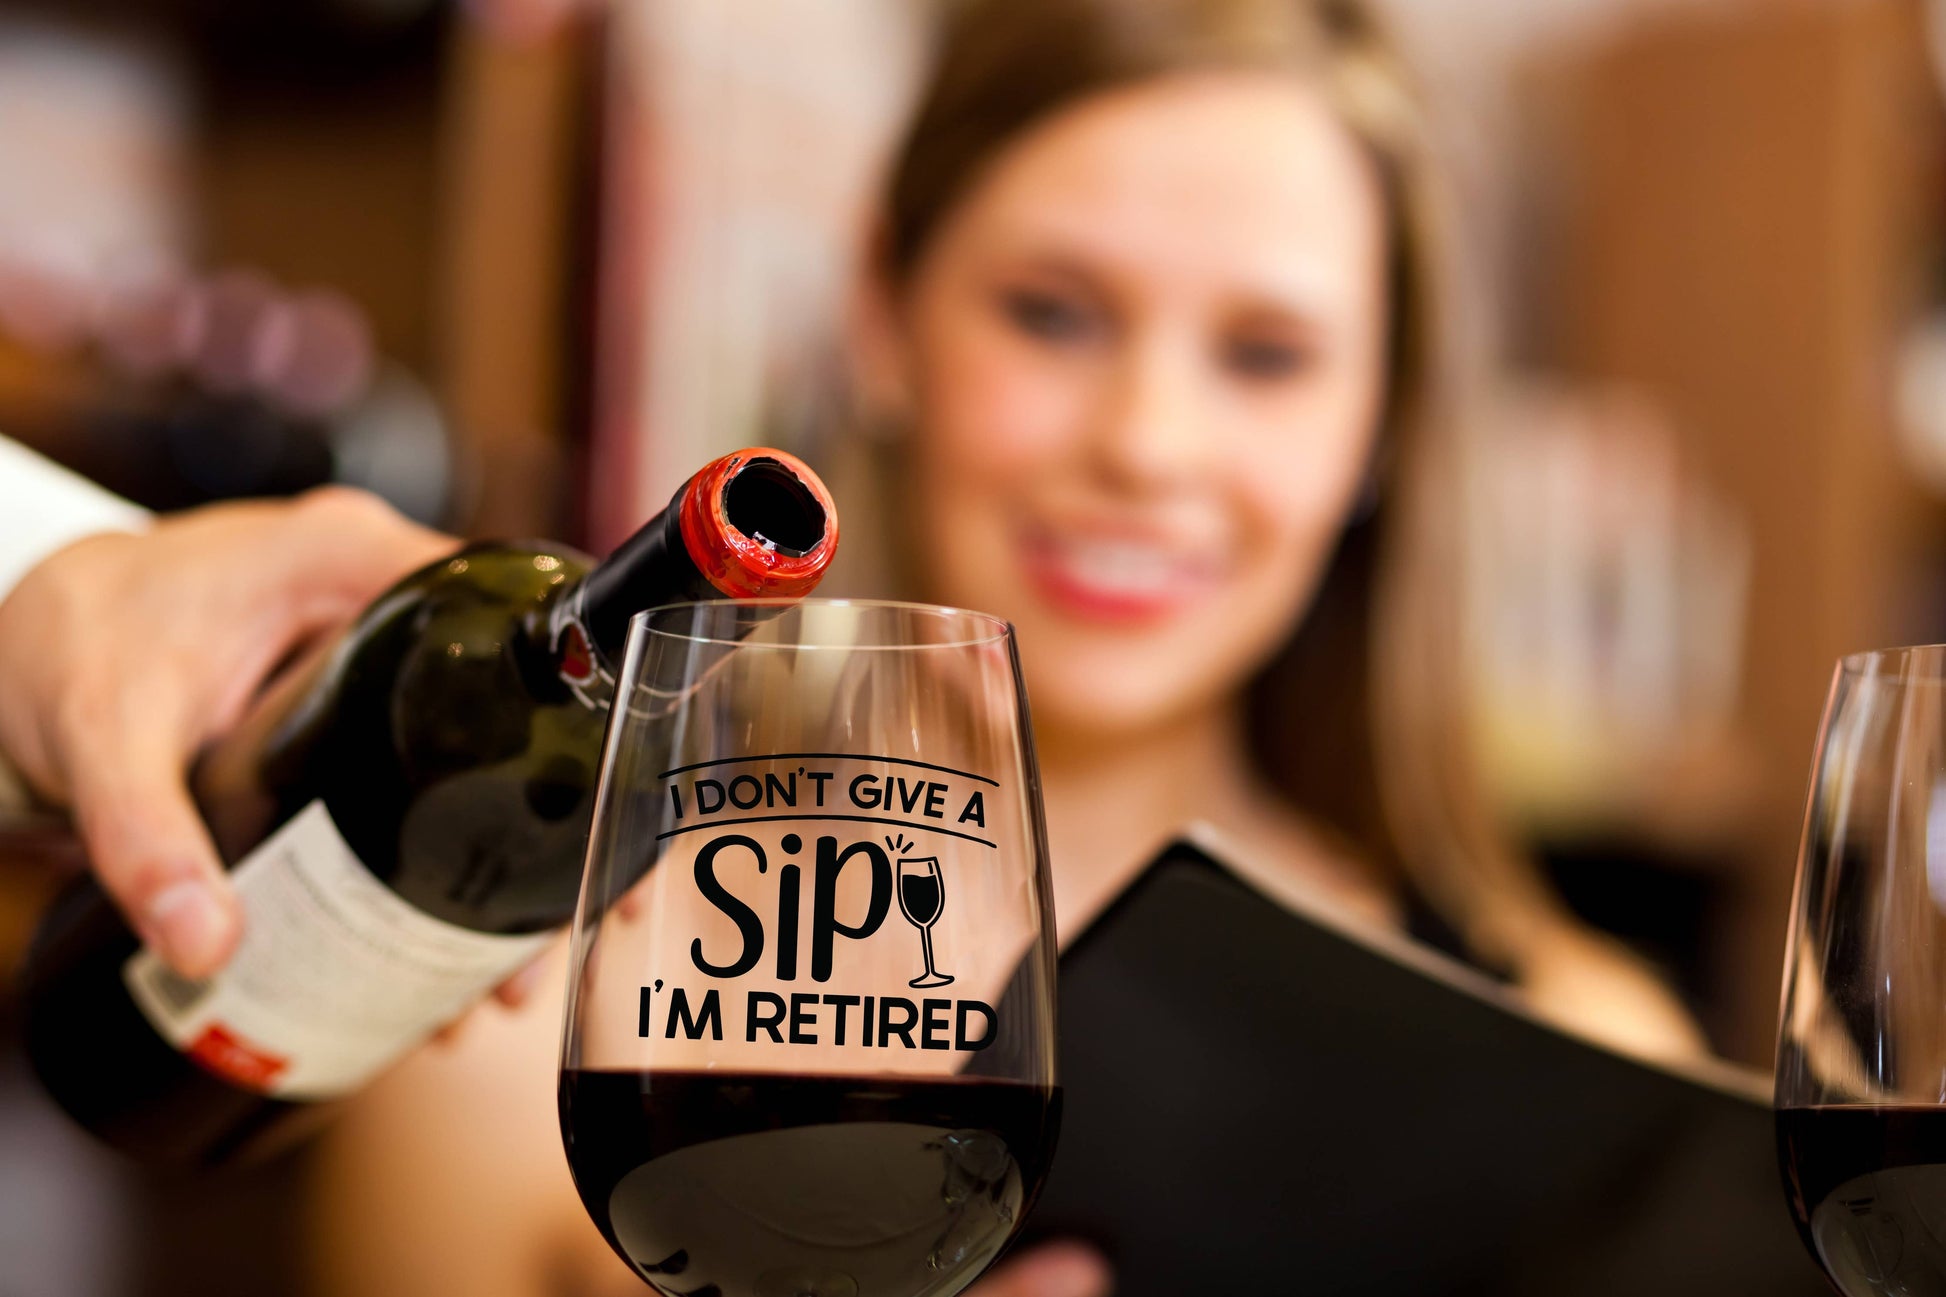 I Don't Give A Sip I'm Retired - Wine Glass Core Cedar Crate Market